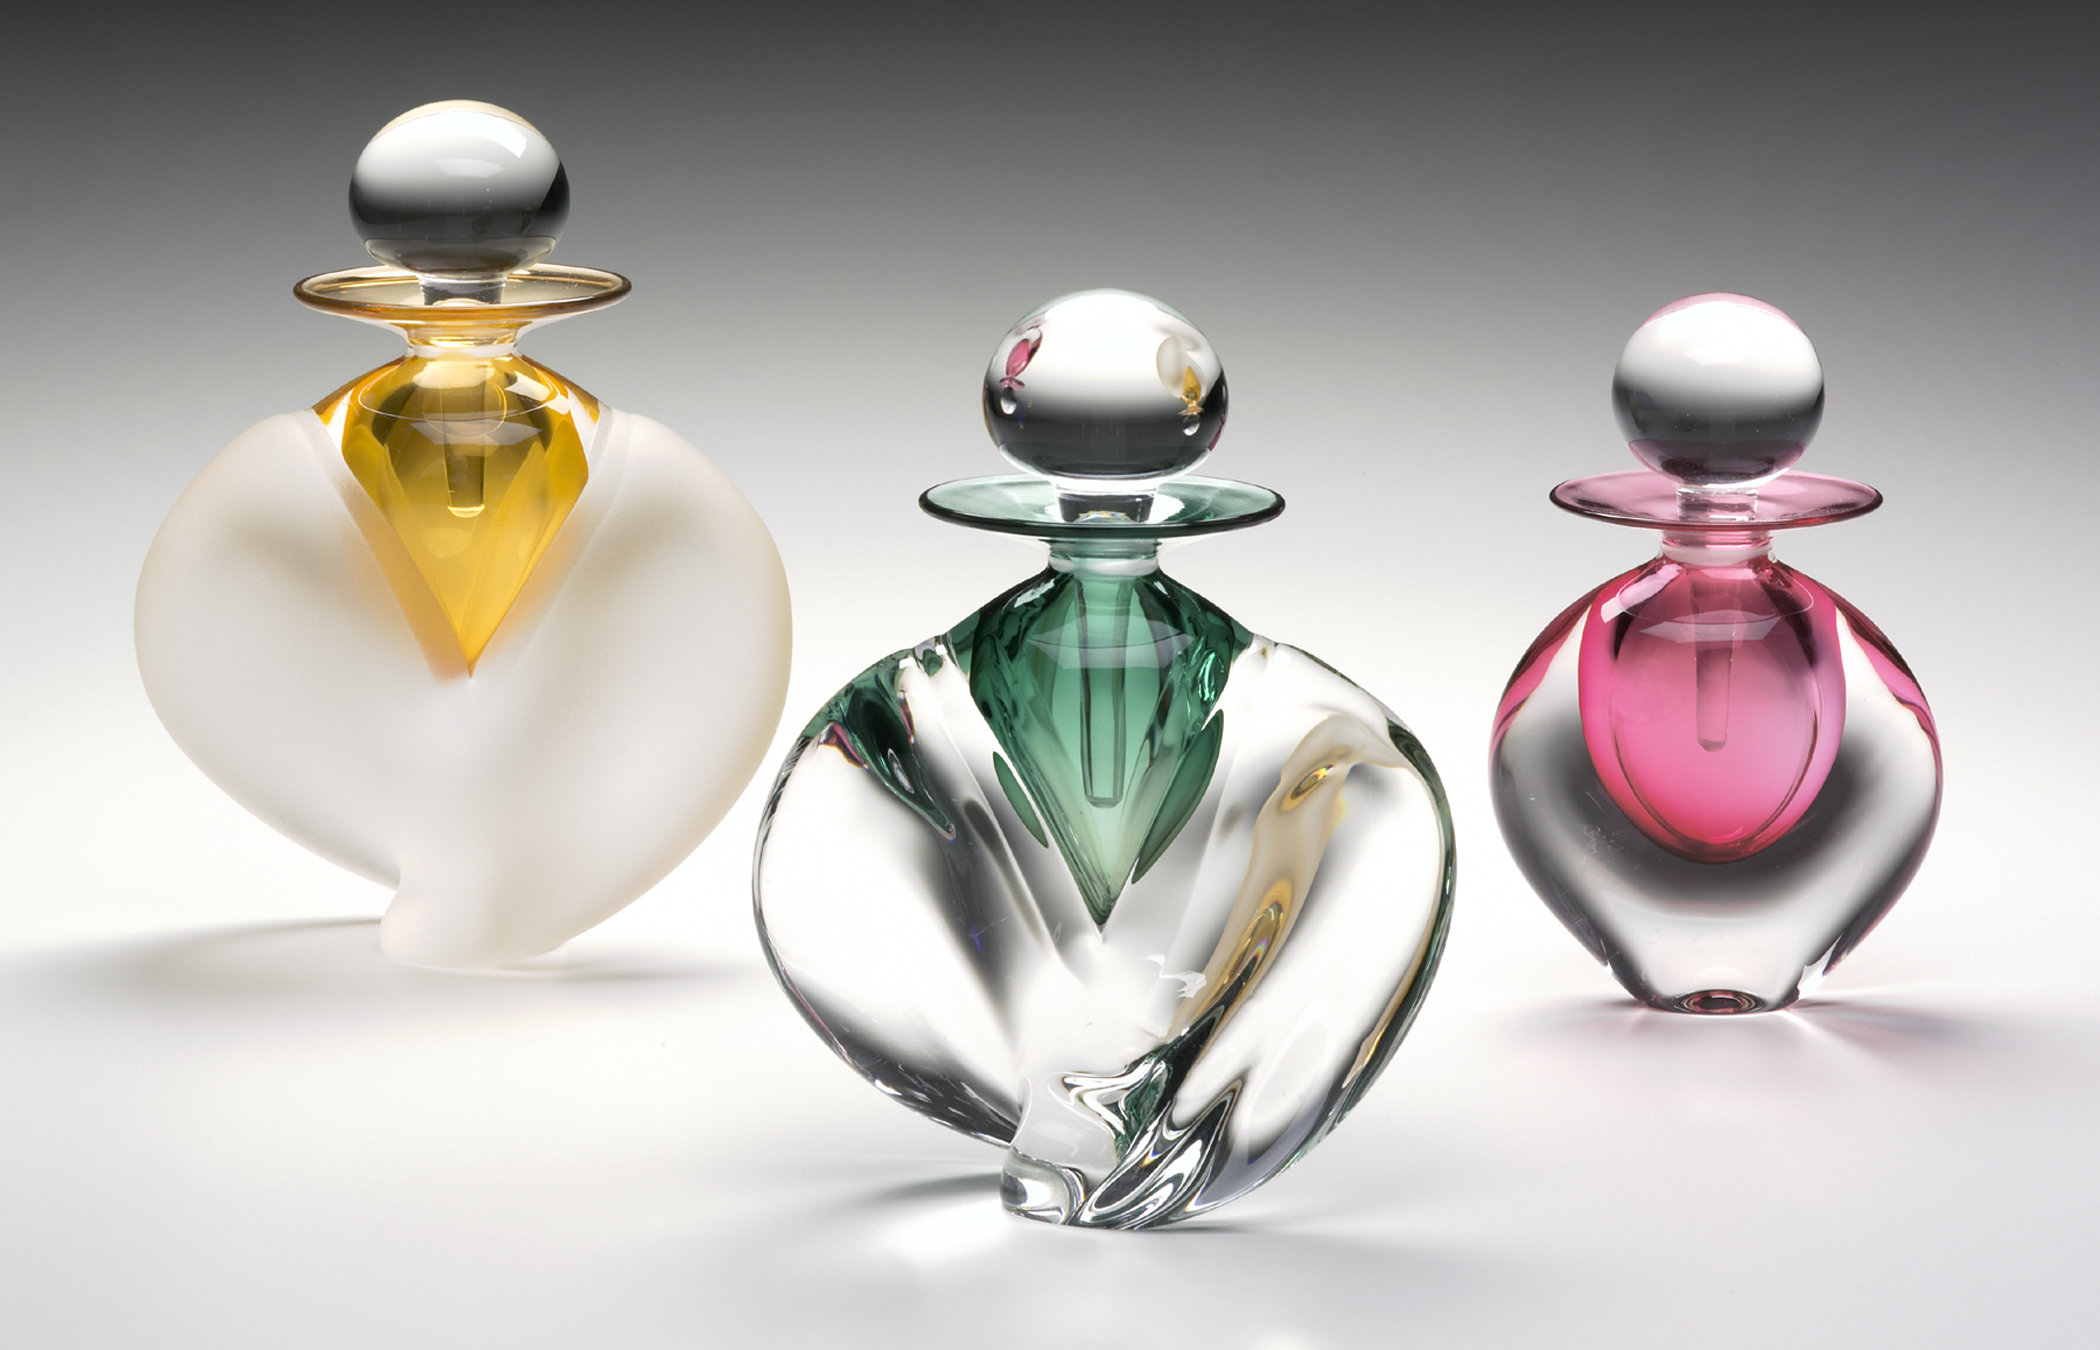 Winged And Flat Perfume Bottles By Michael Trimpol And Monique